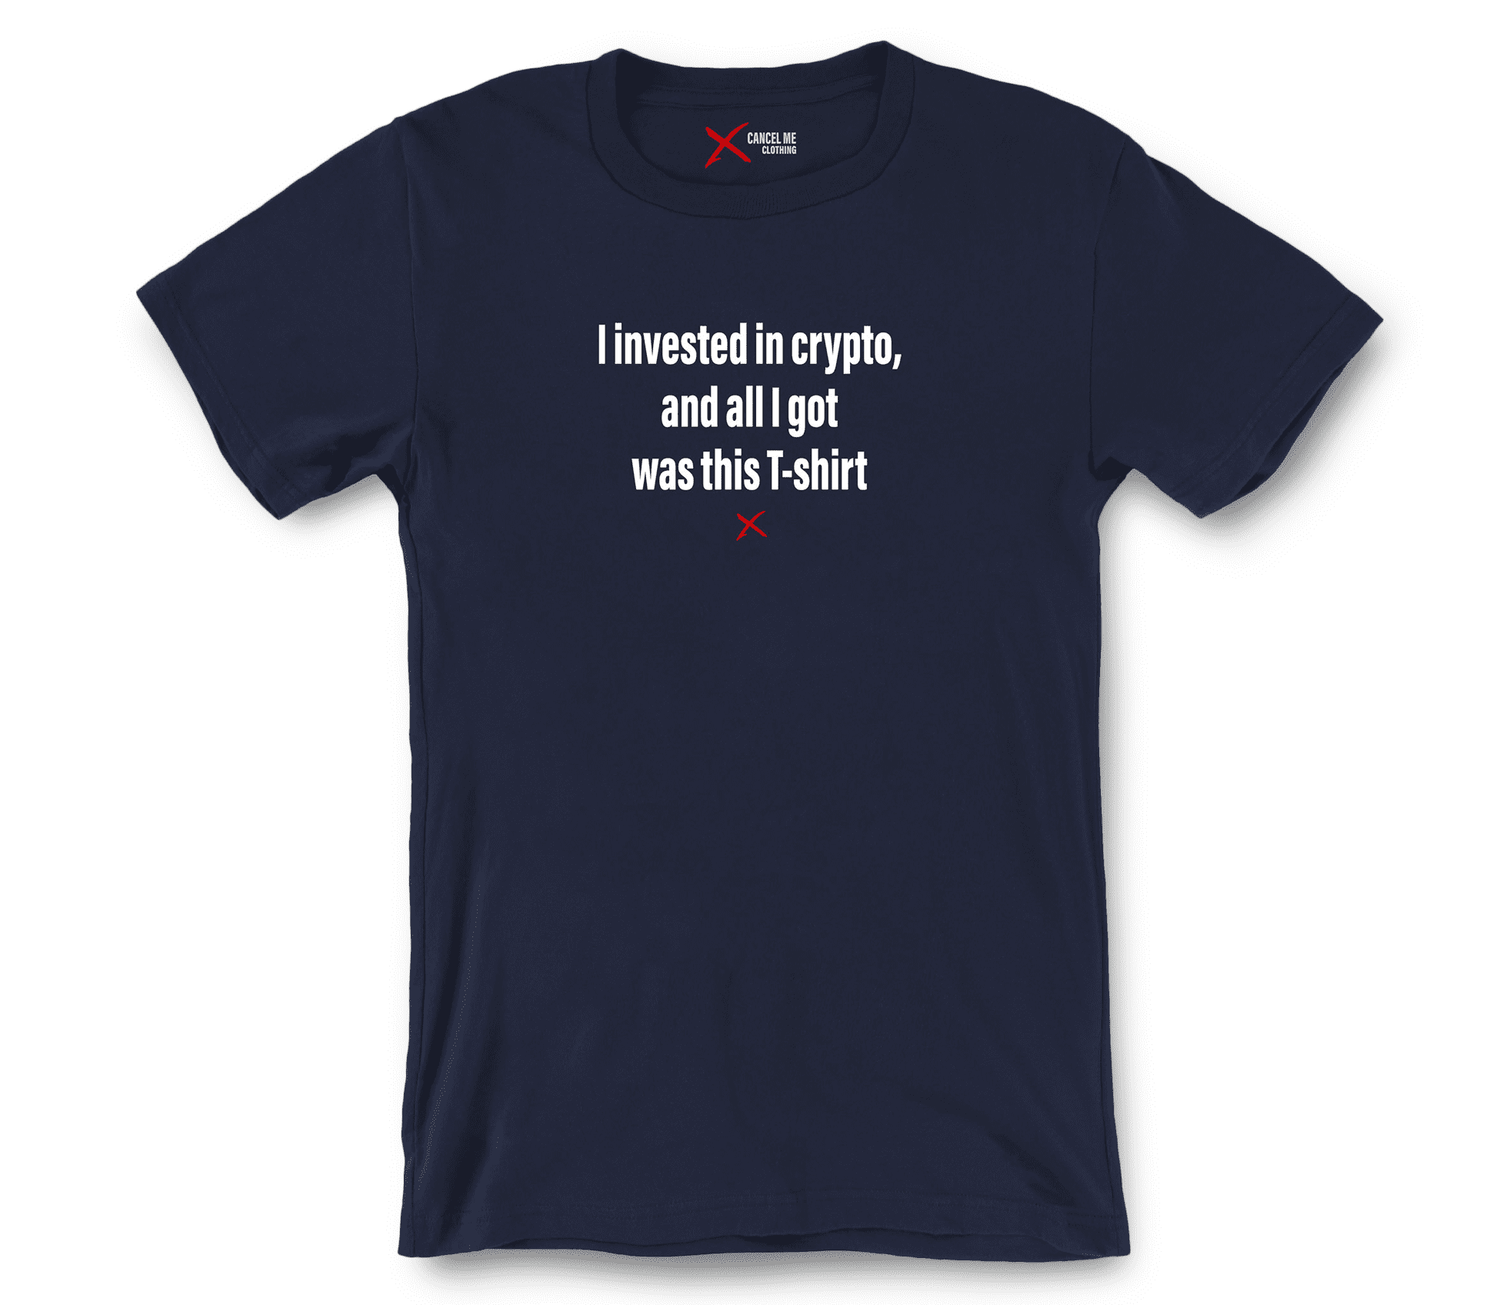 lp-money_1-shirt_7791984017578_i-invested-in-crypto-and-all-i-got-was-this-t-shirt-shirt_Navy.png